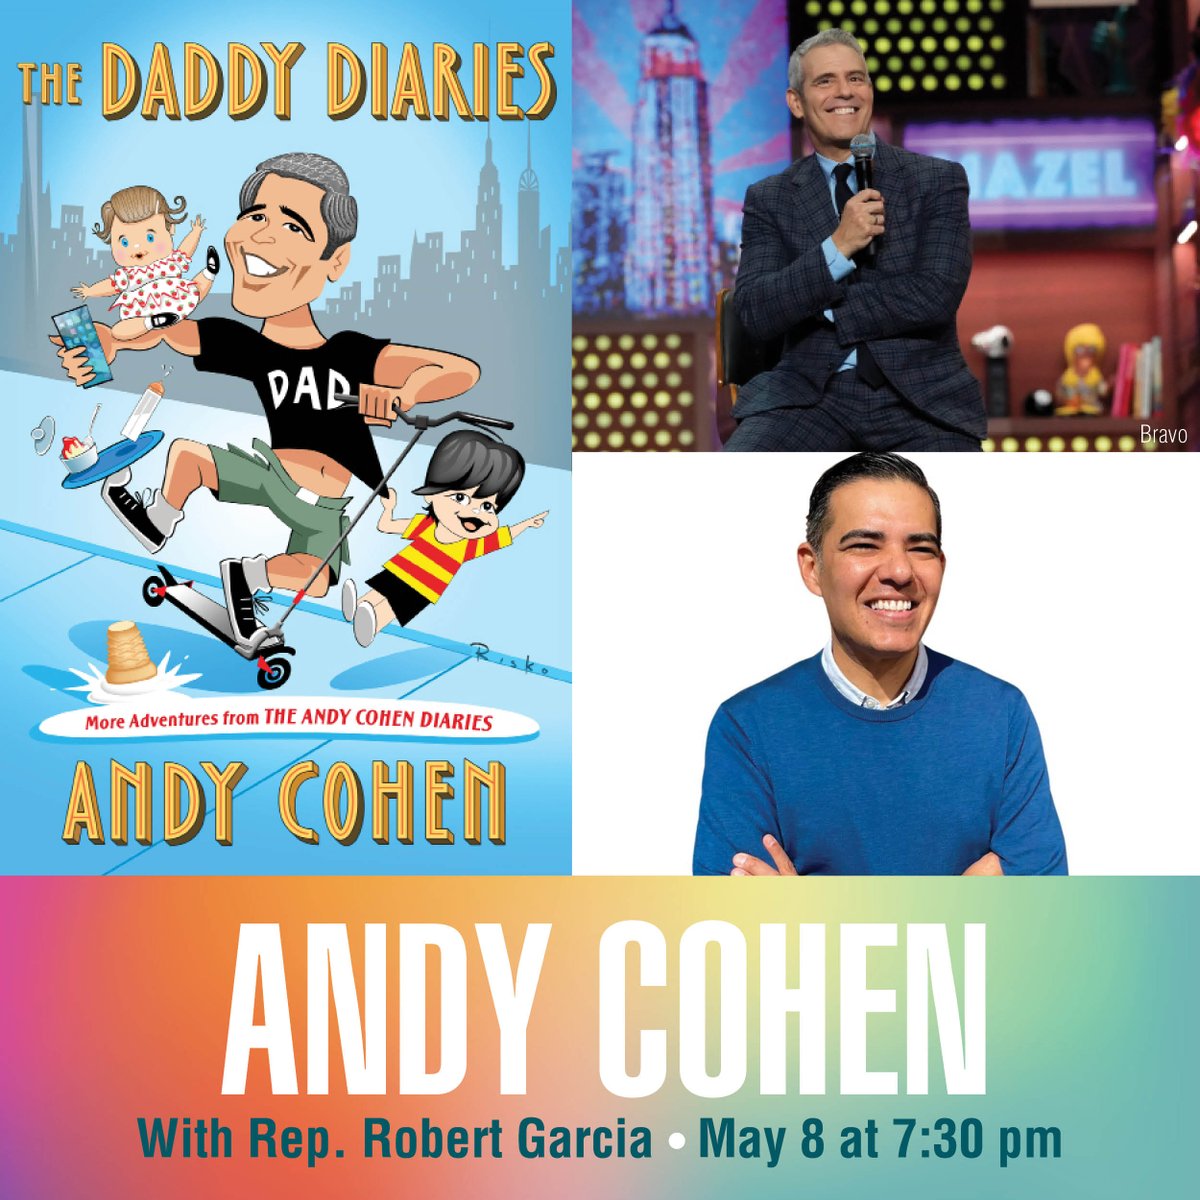 Tickets are selling fast for tomorrow's event with @Andy and @RepRobertGarcia. Be sure to get yours soon before they sell out: bit.ly/3PMayma